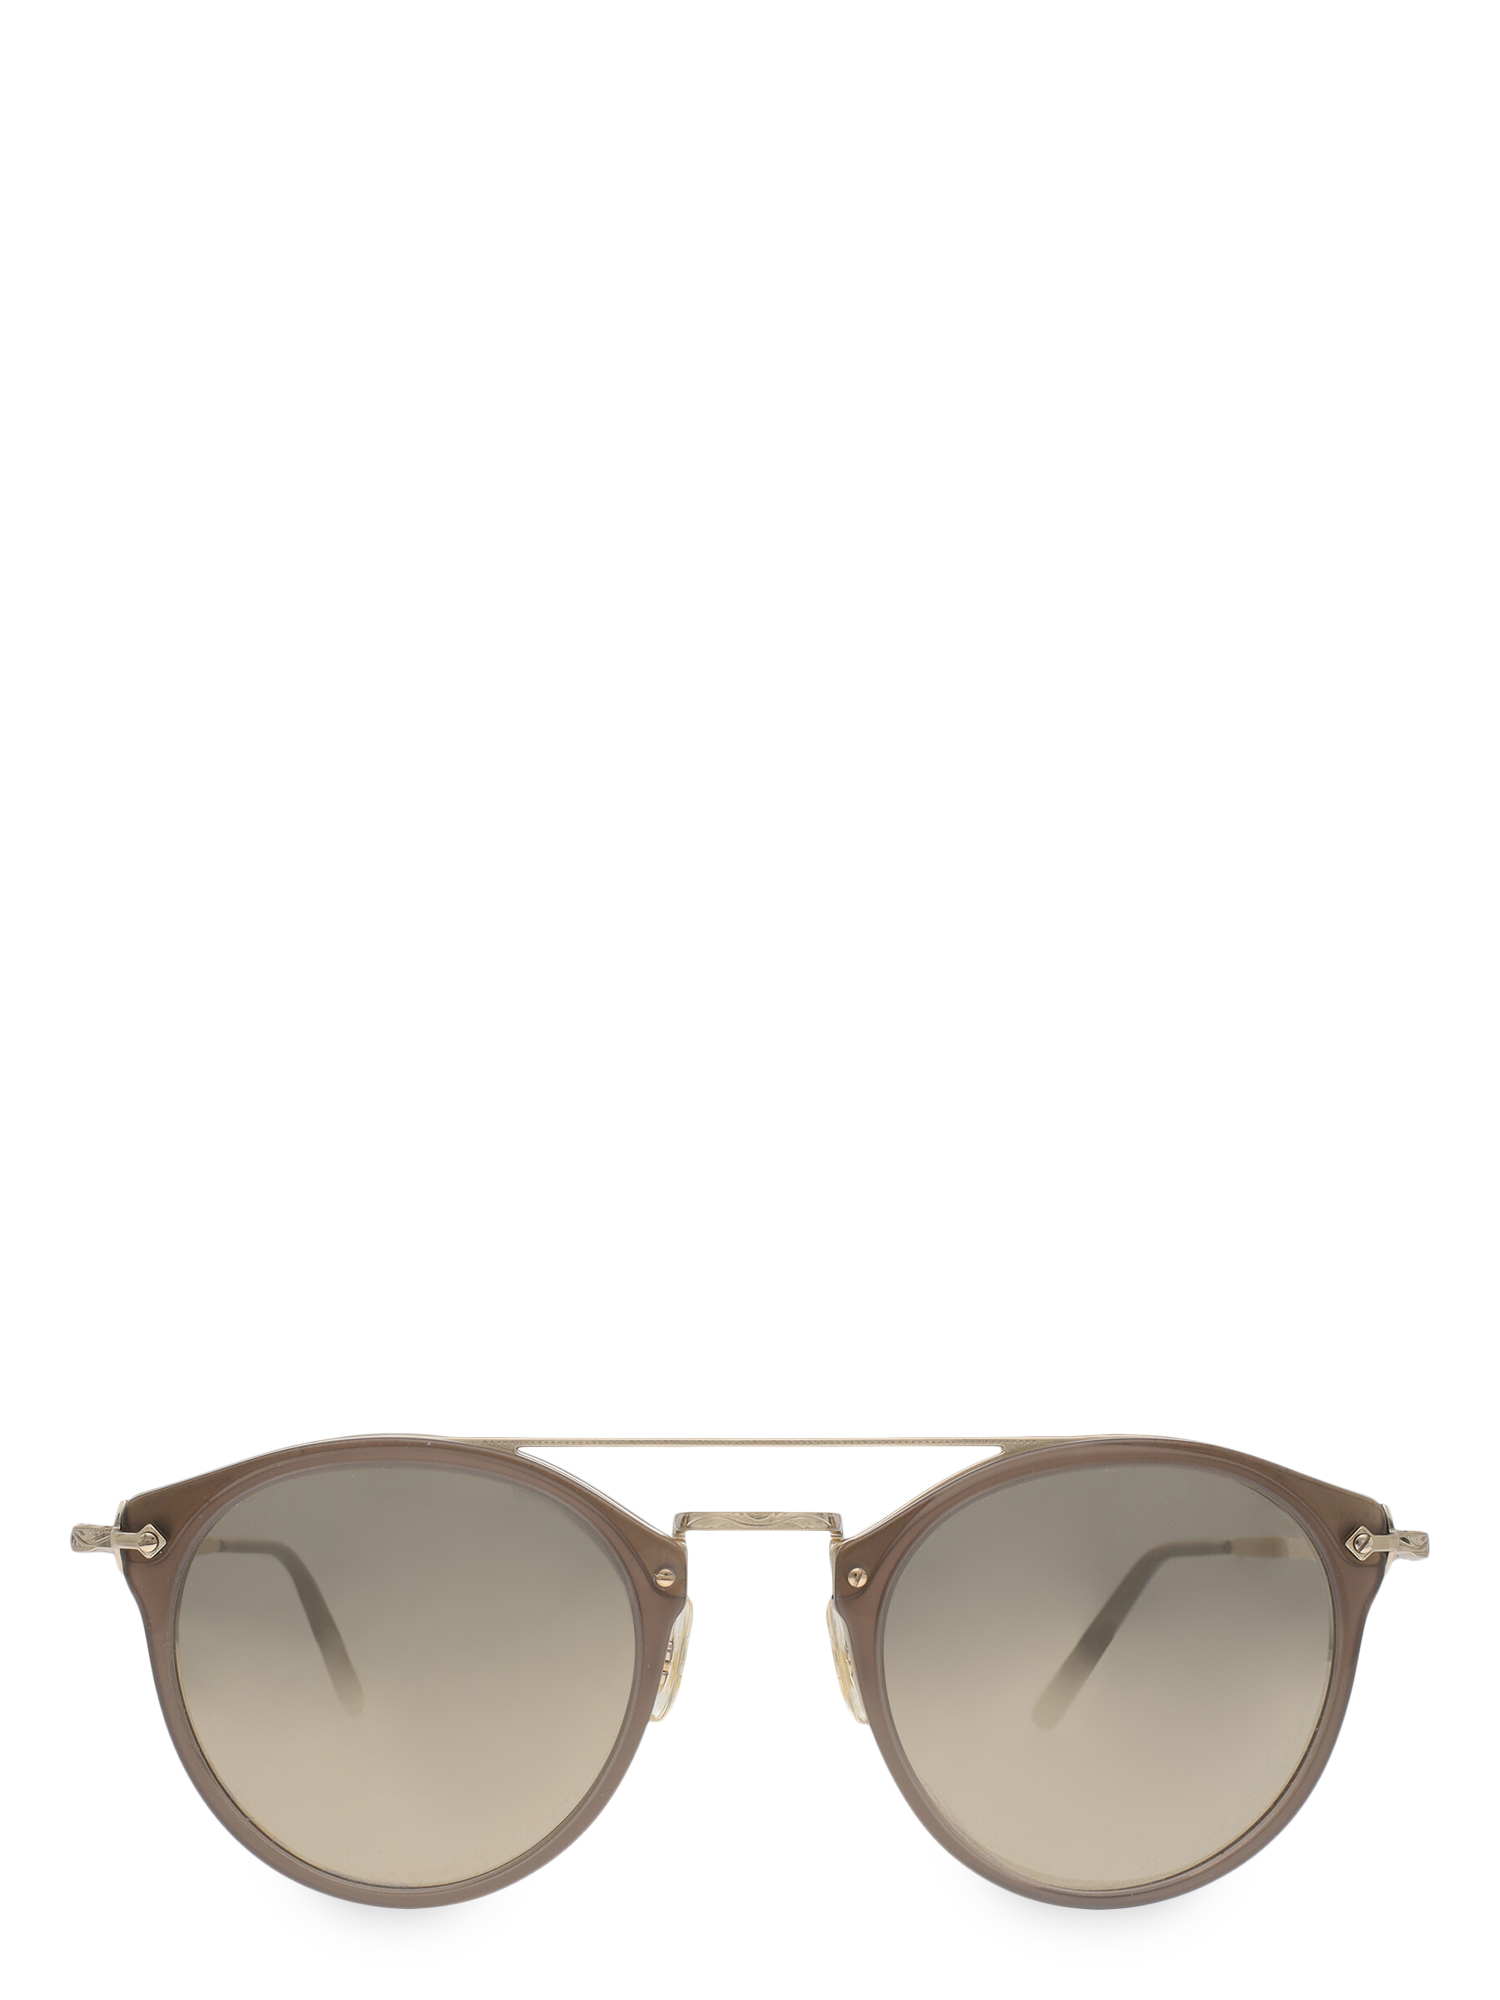 Pre-owned Oliver Peoples Sunglasses In Brown, Gold